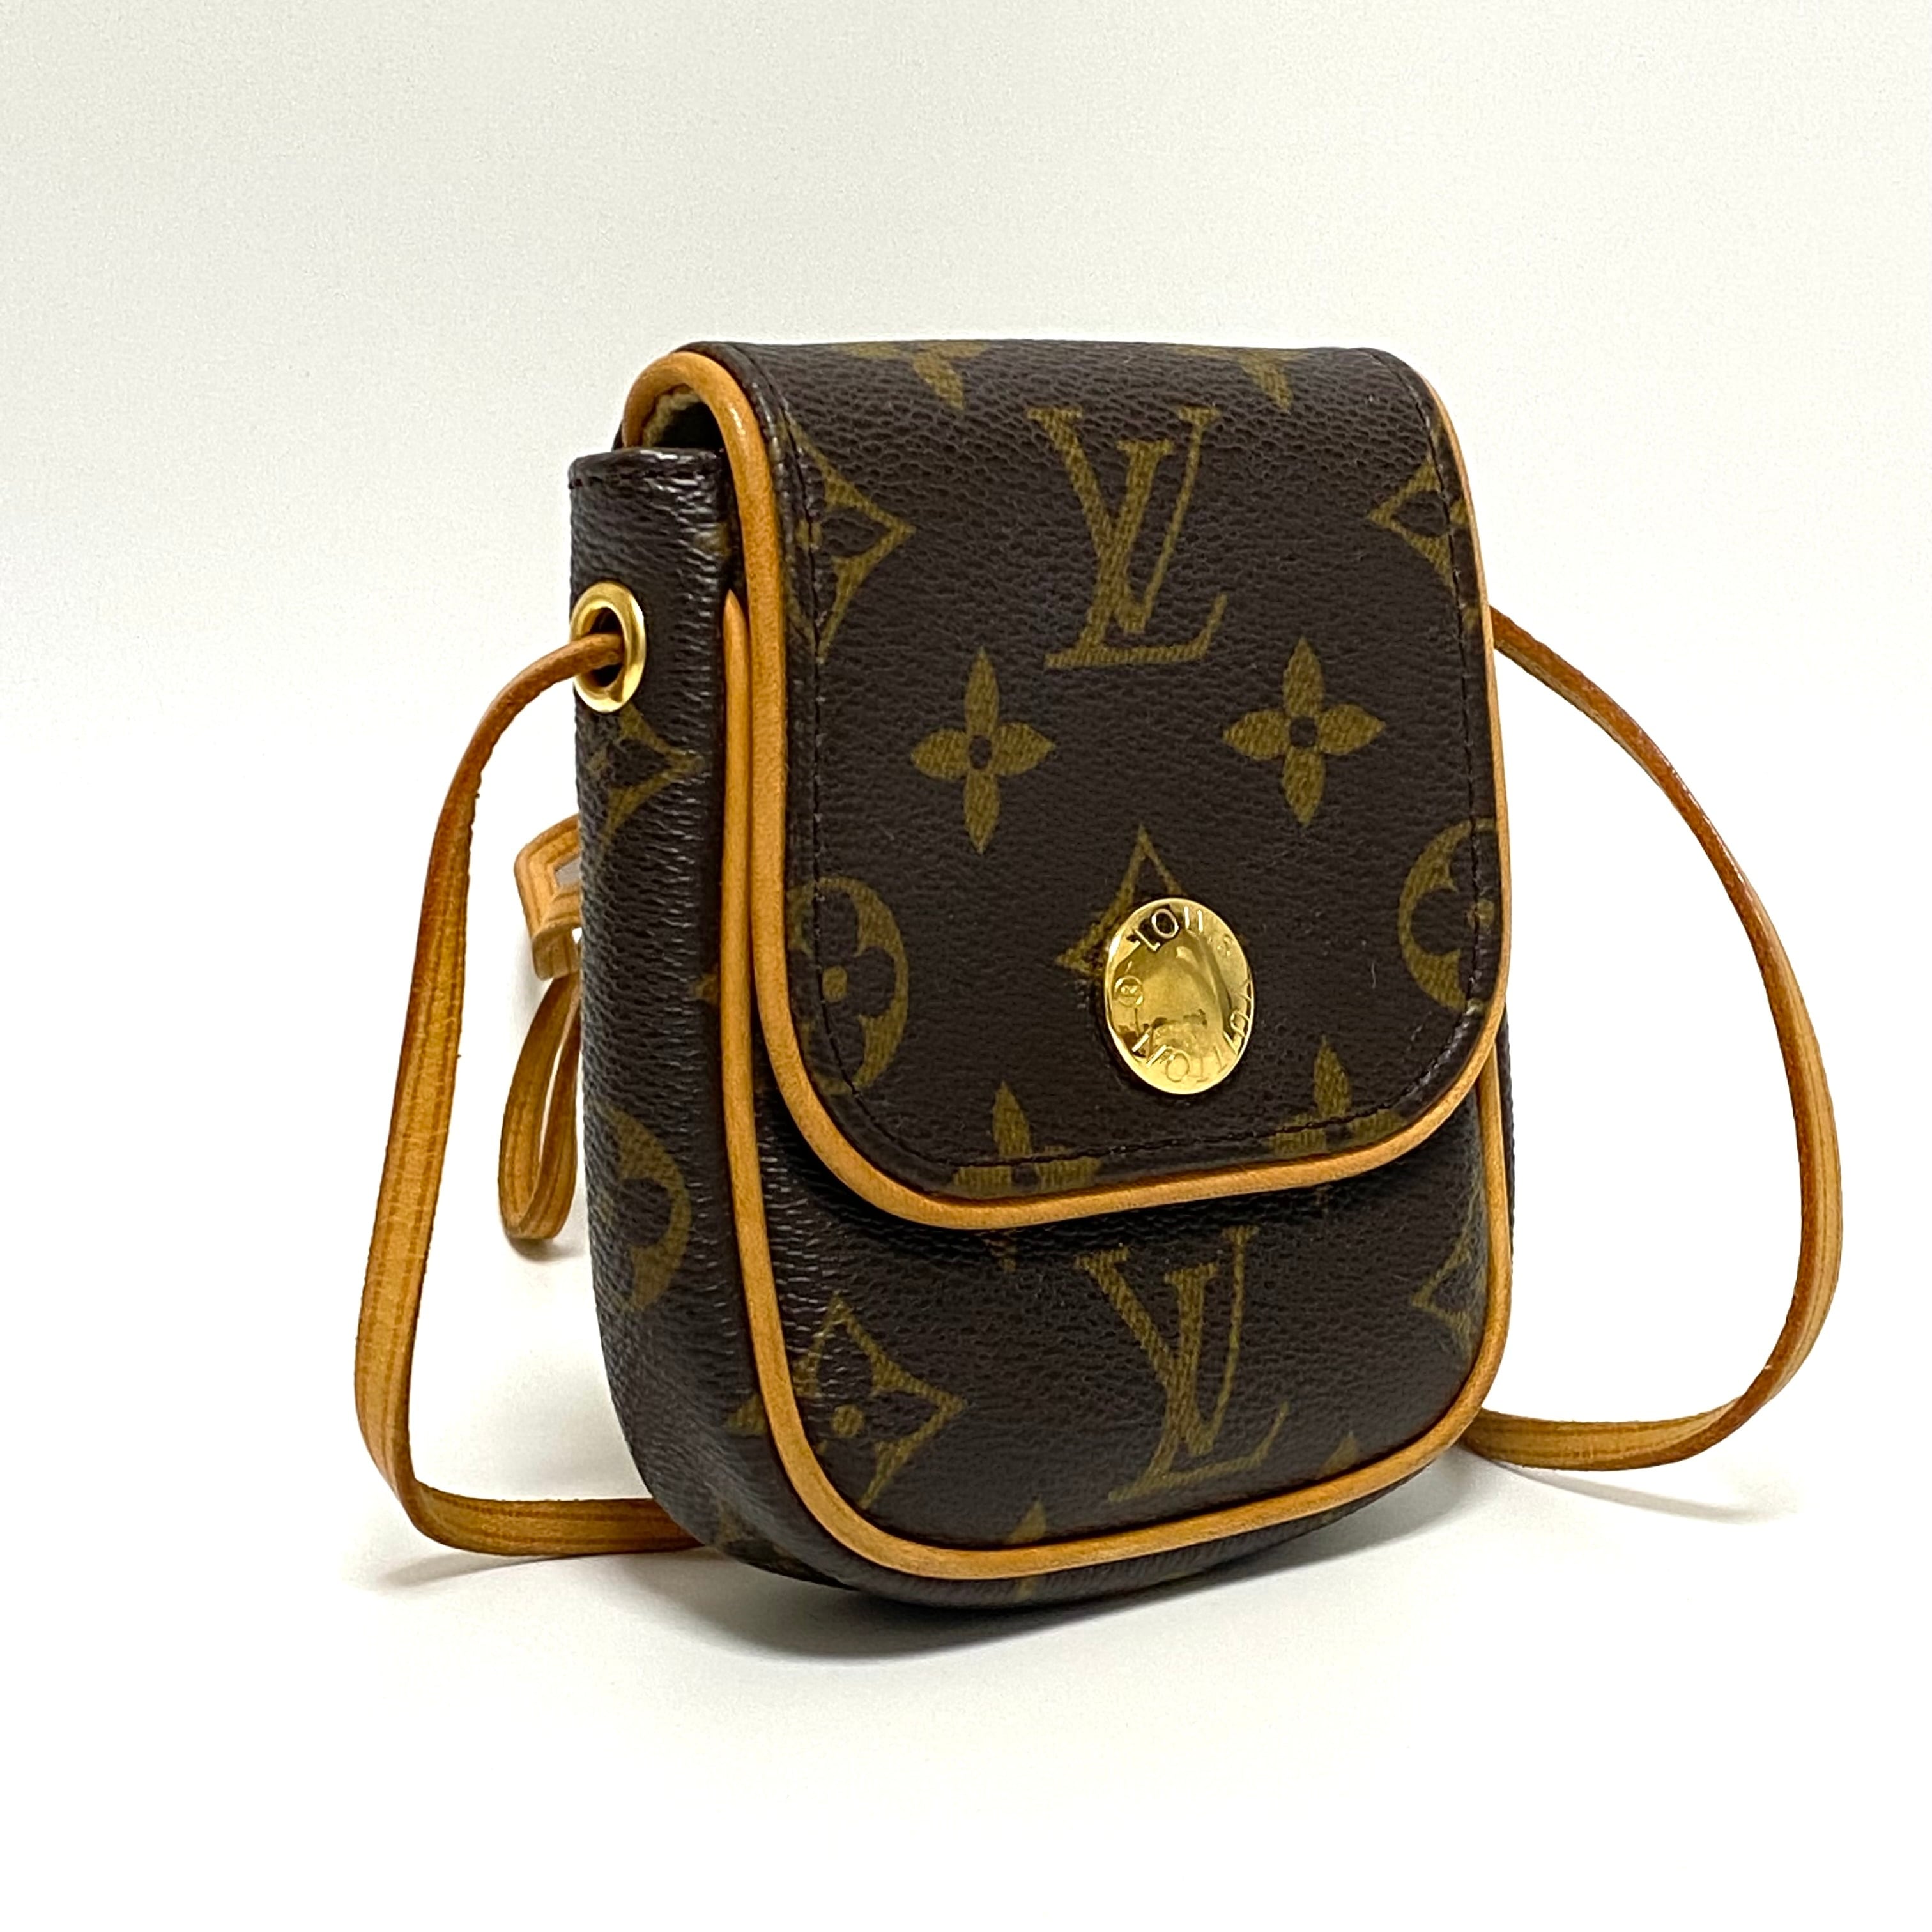 LOUIS VUITTON ルイヴィトン ポシェット カンクーン モノグラム約12cm